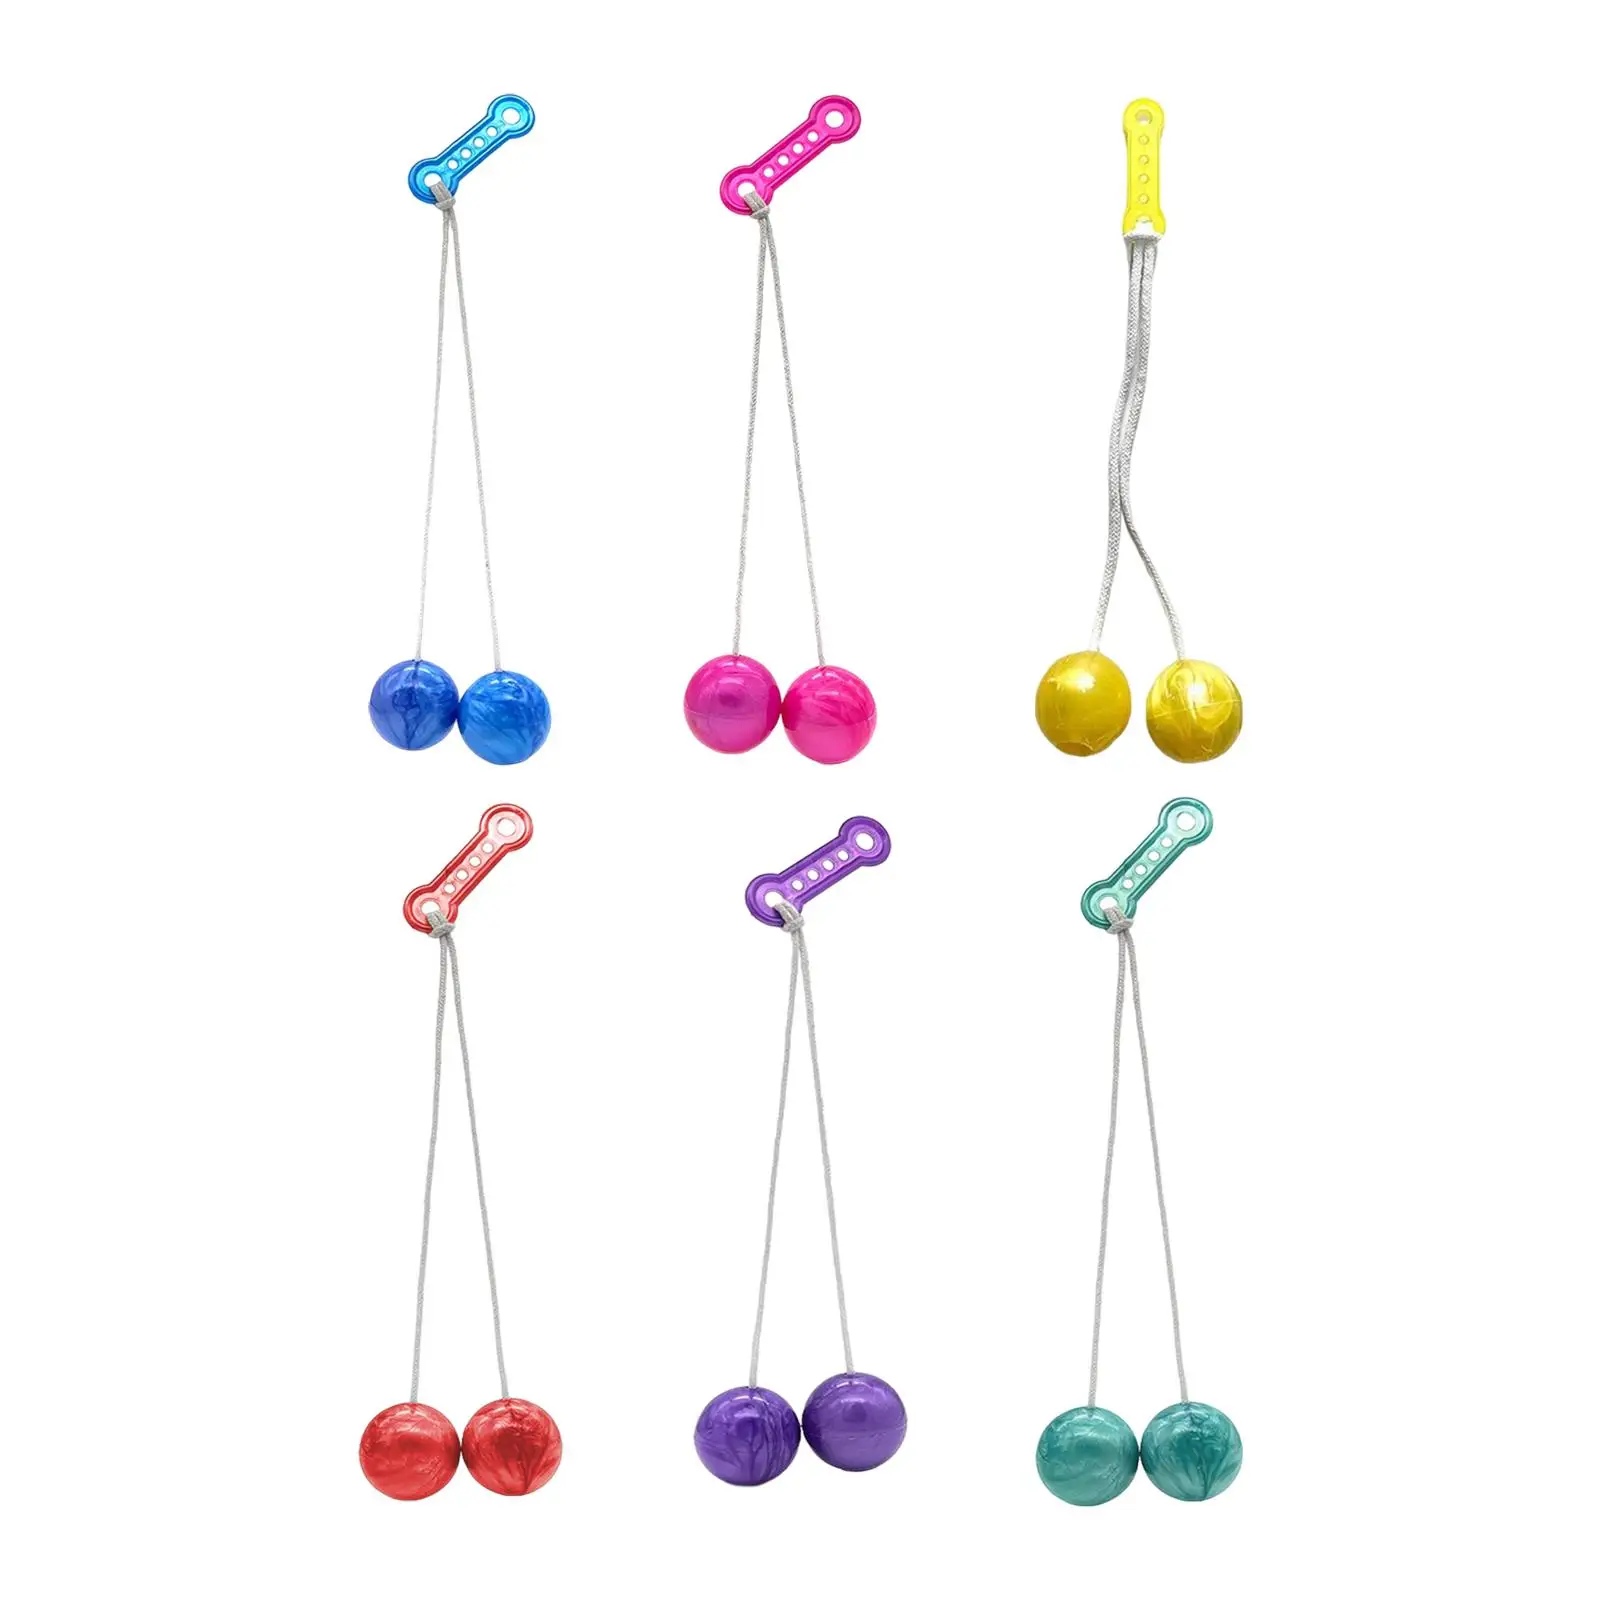 

Click Cack Ball ,Noise Maker Toy ,Hands on Abilities, Fine Motor Skills for Goodie Bag Toys